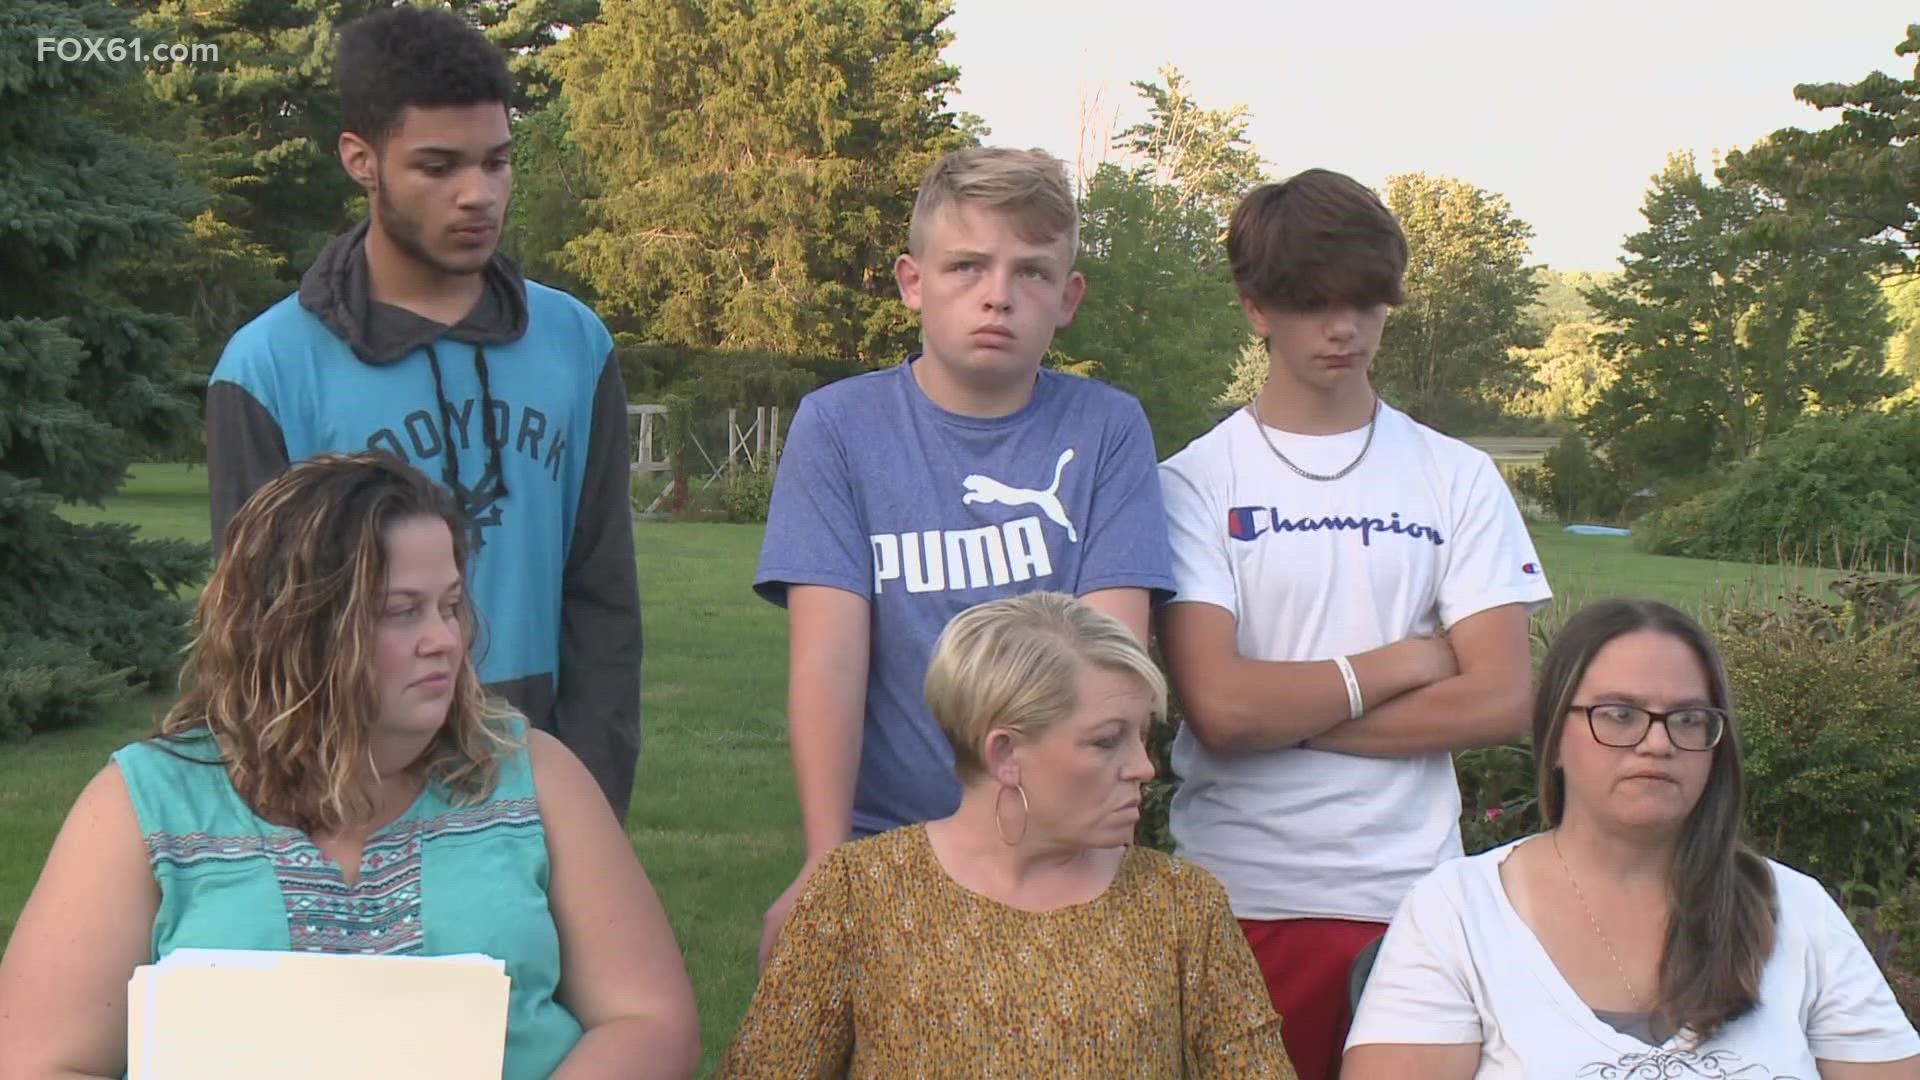 The mothers would like closure after their sons were hit by a car that fled the scene.